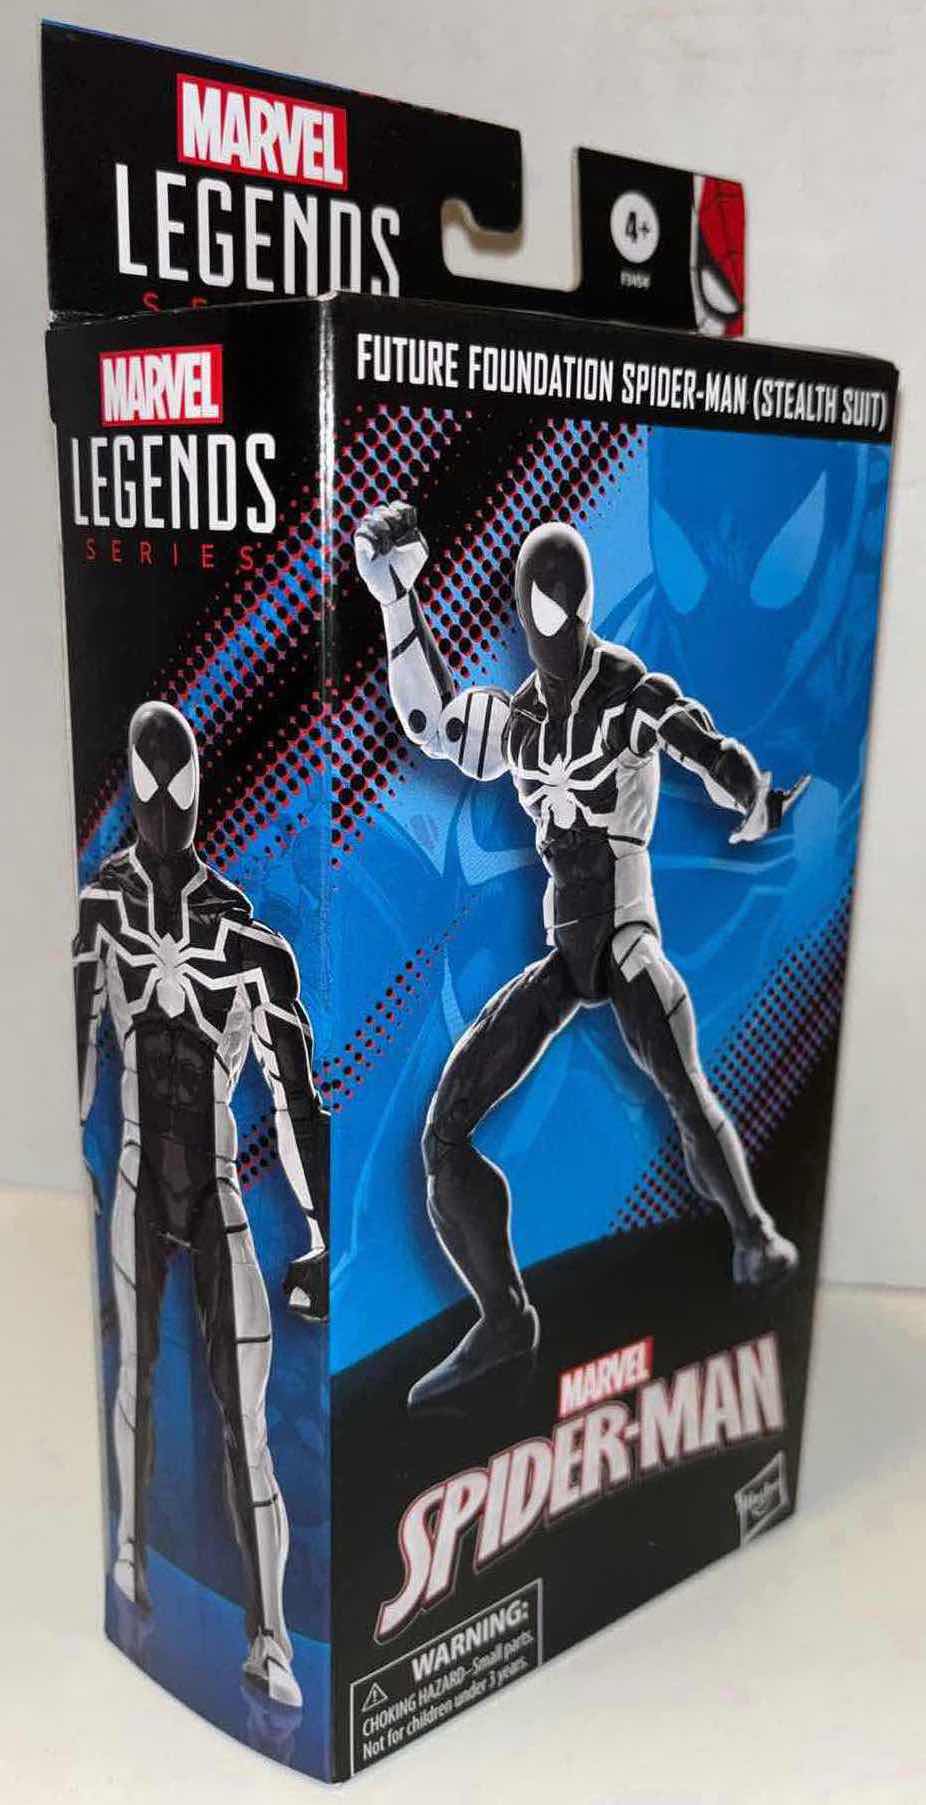 Photo 2 of NEW HASBRO MARVEL LEGENDS SERIES SPIDER-MAN 60 AMAZING YEARS ACTION FIGURE & ACCESSORIES, “FUTURE FOUNDATION SPIDER-MAN (STEALTH SUIT)”